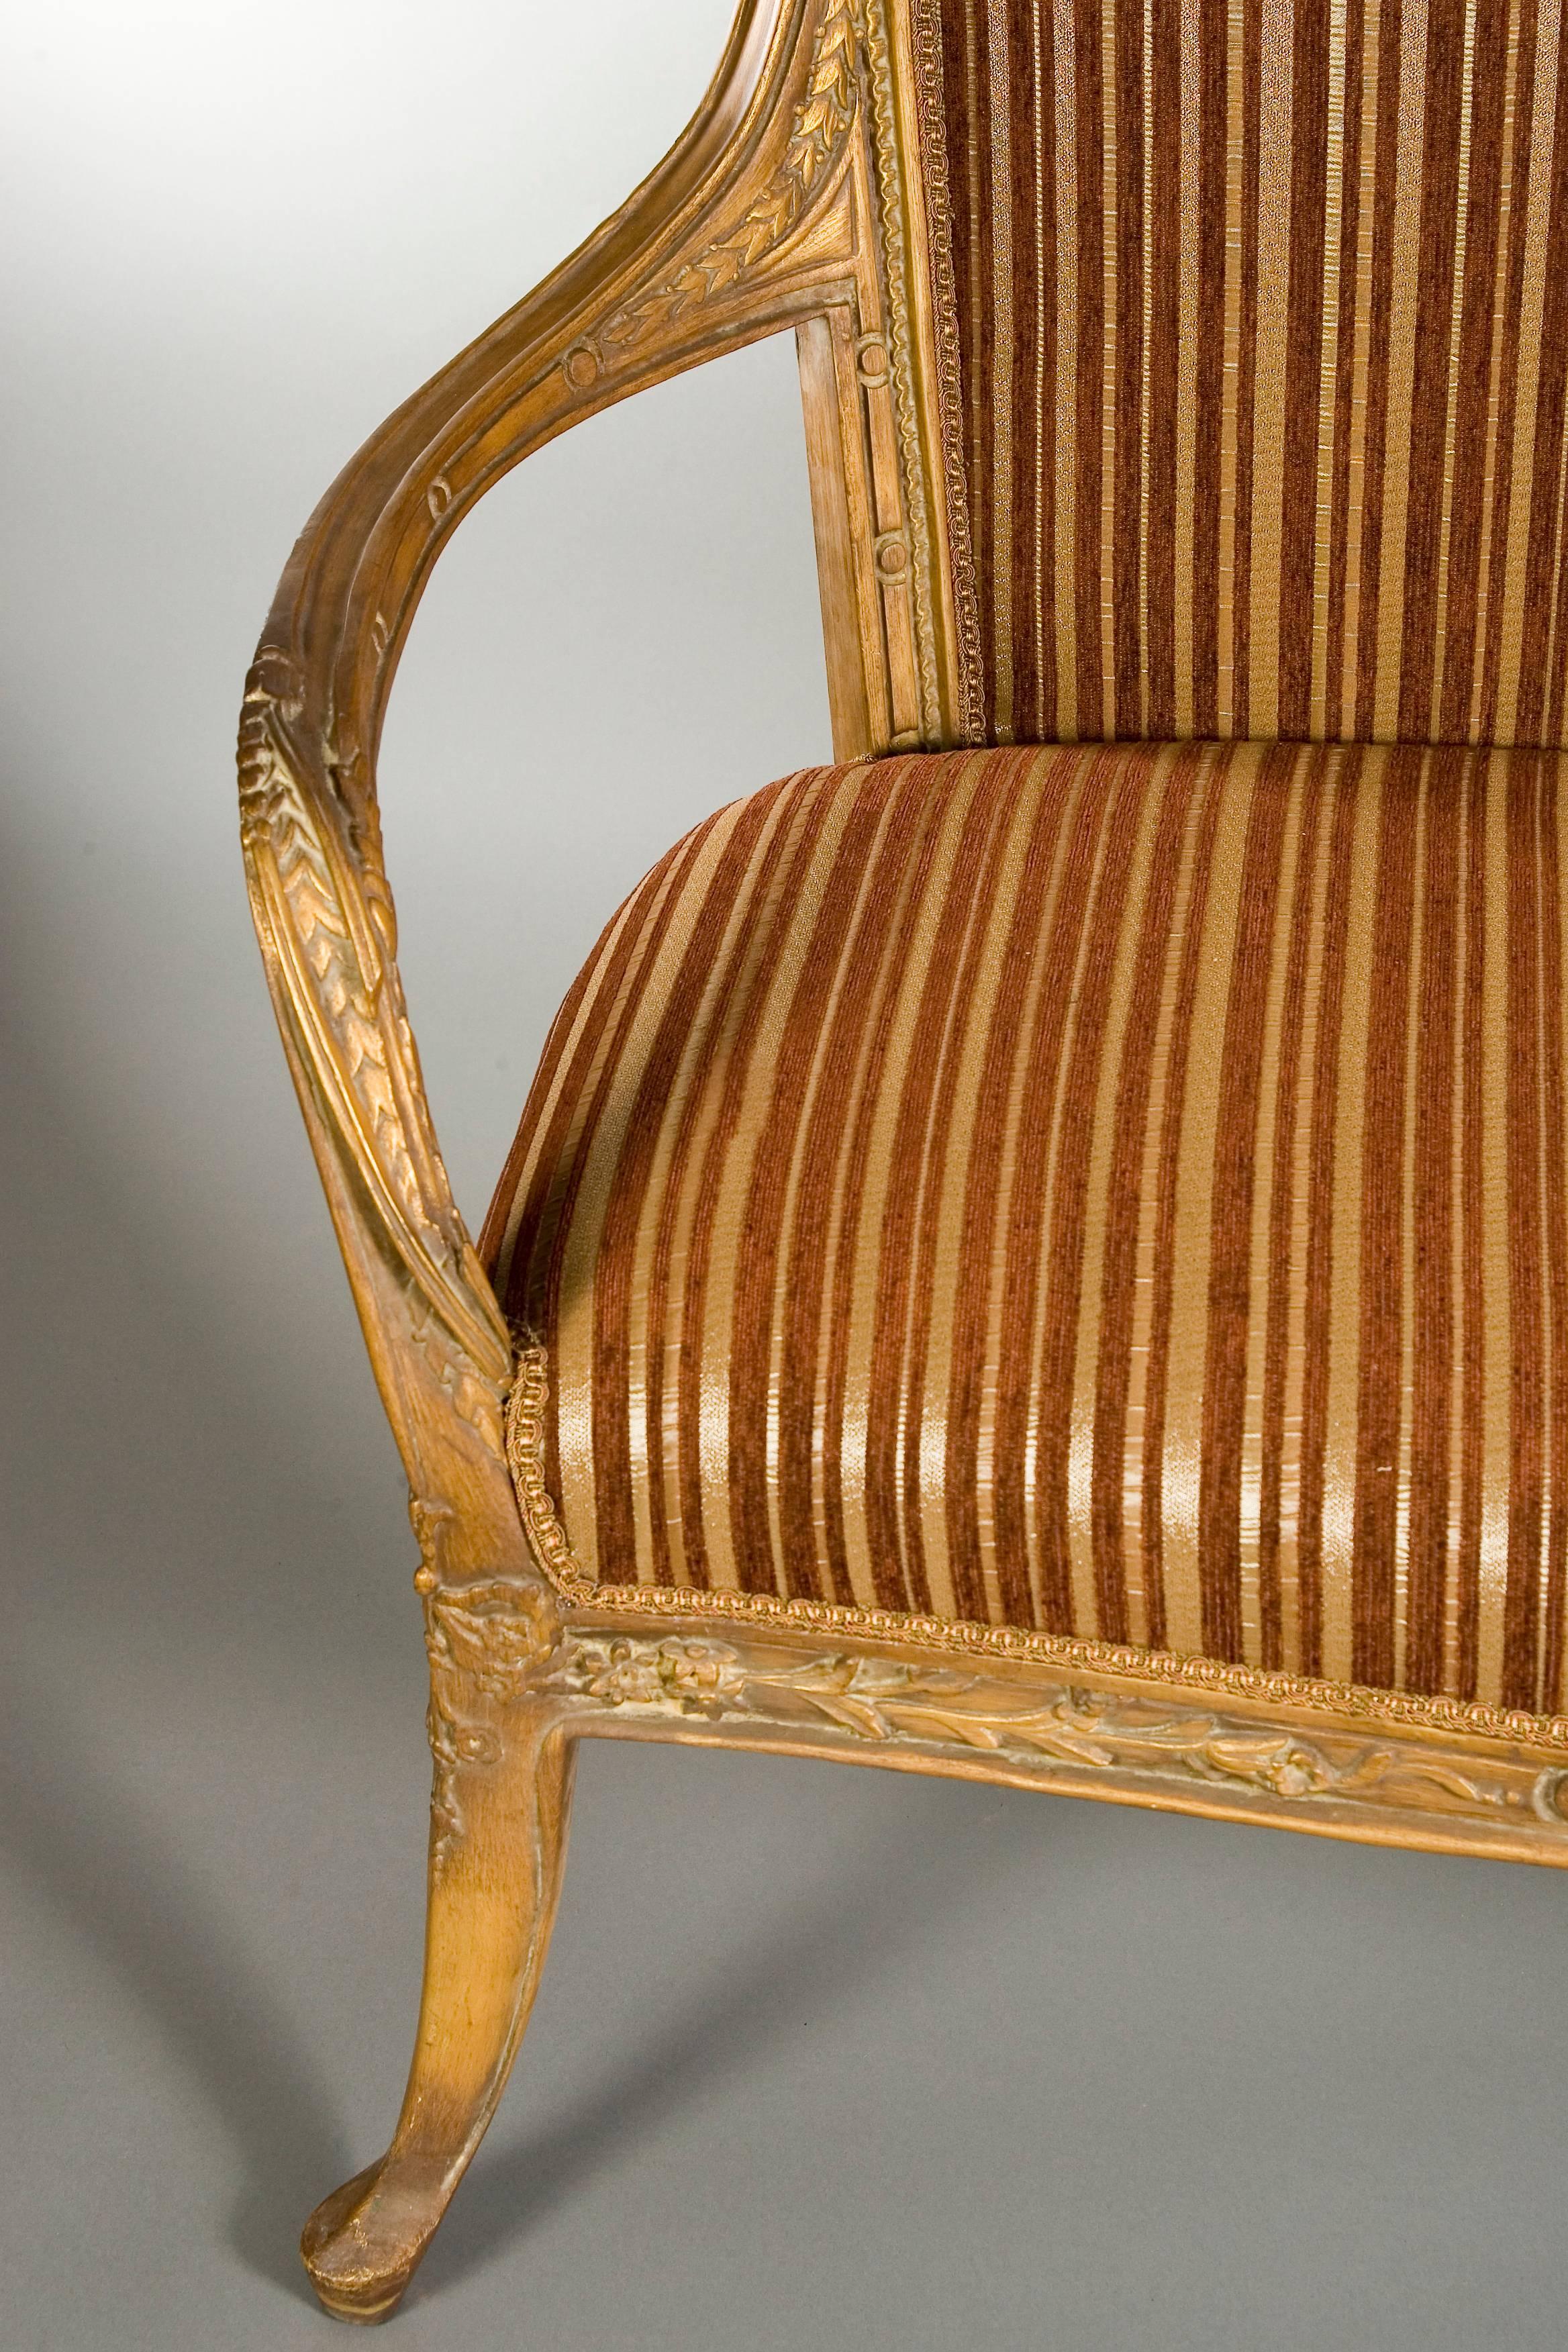 Gilt 20th Century French Sofa in the Art Nouveau Style Beechwood